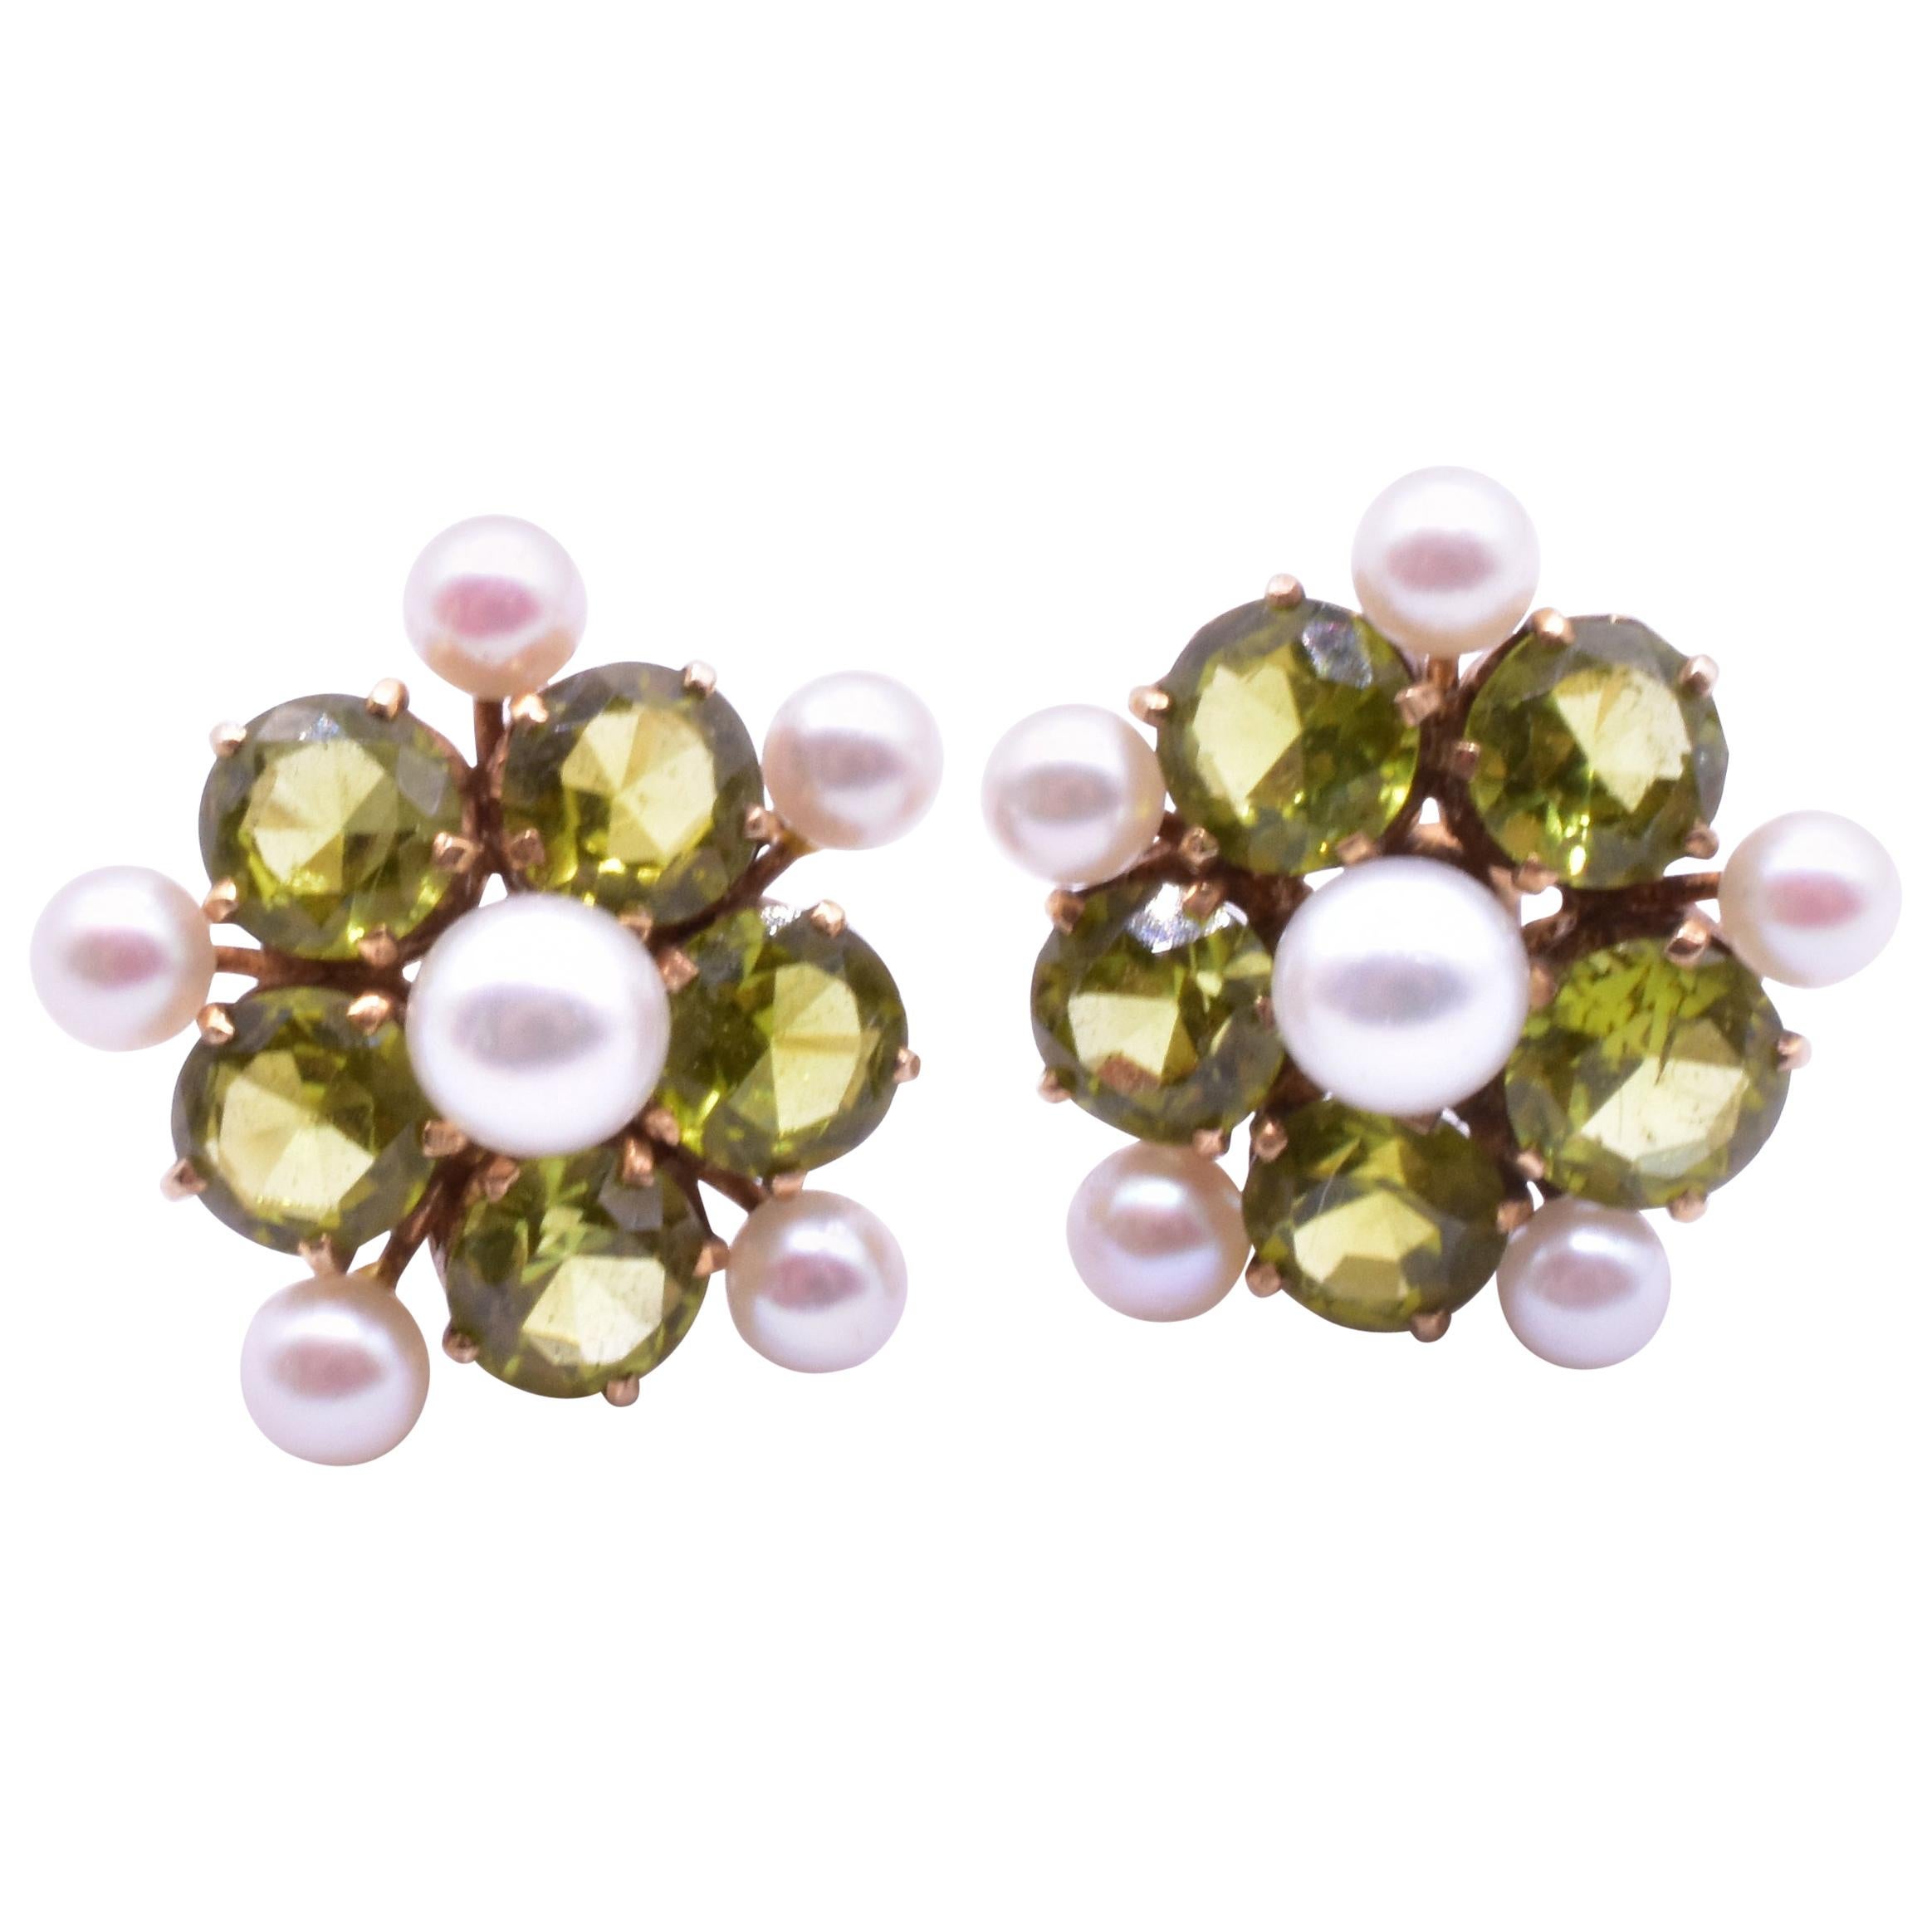 Peridot and Pearl Forget Me Not Earrings Set in Gold, circa 1940